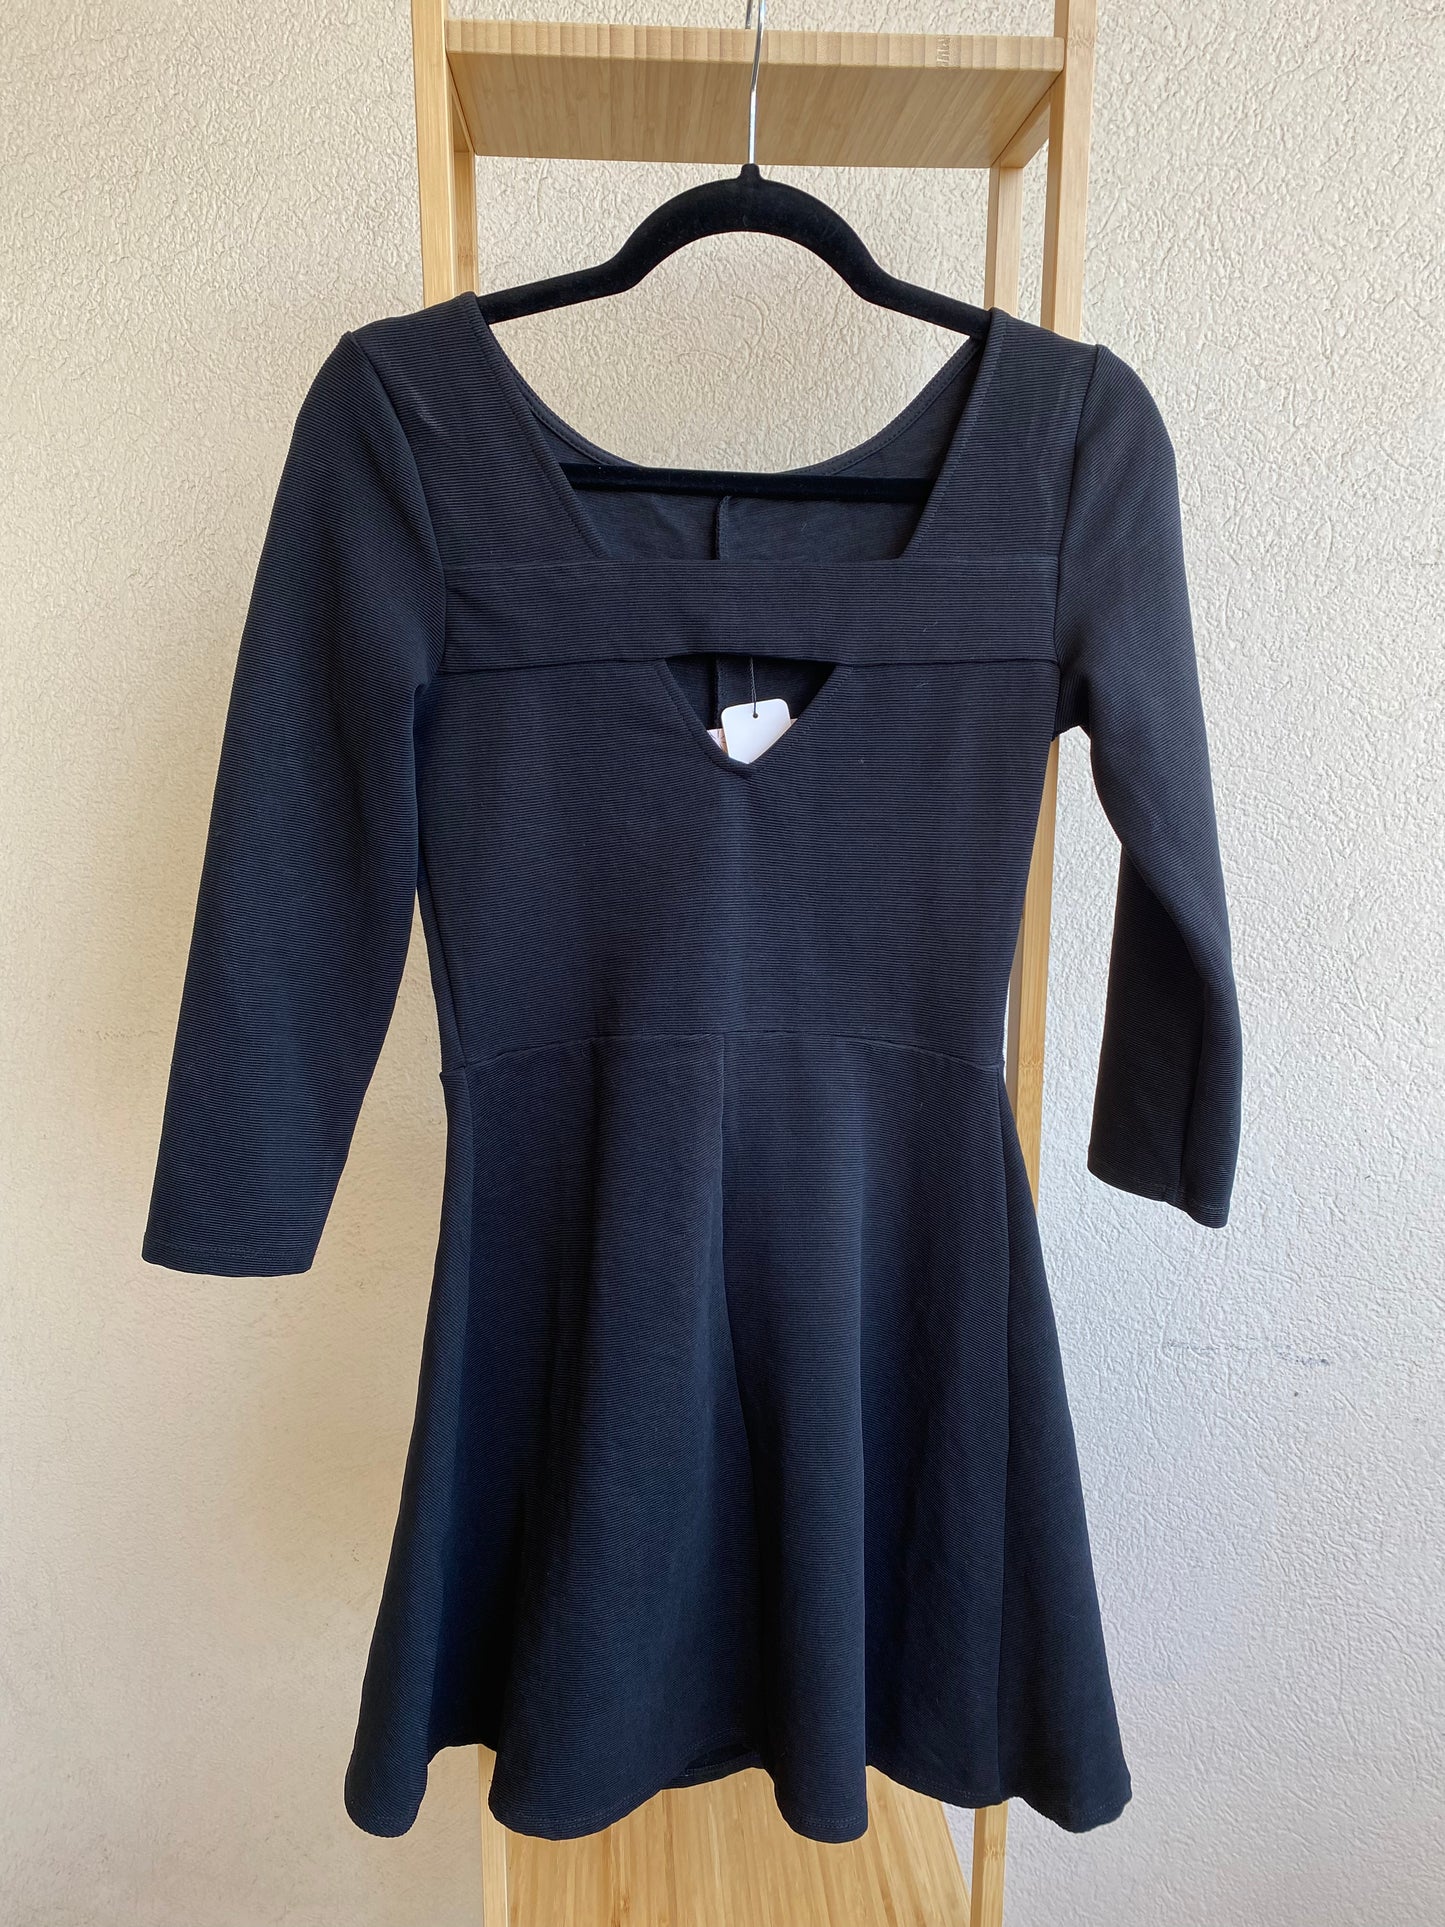 Robe Pull&Bear noire Taille S/M